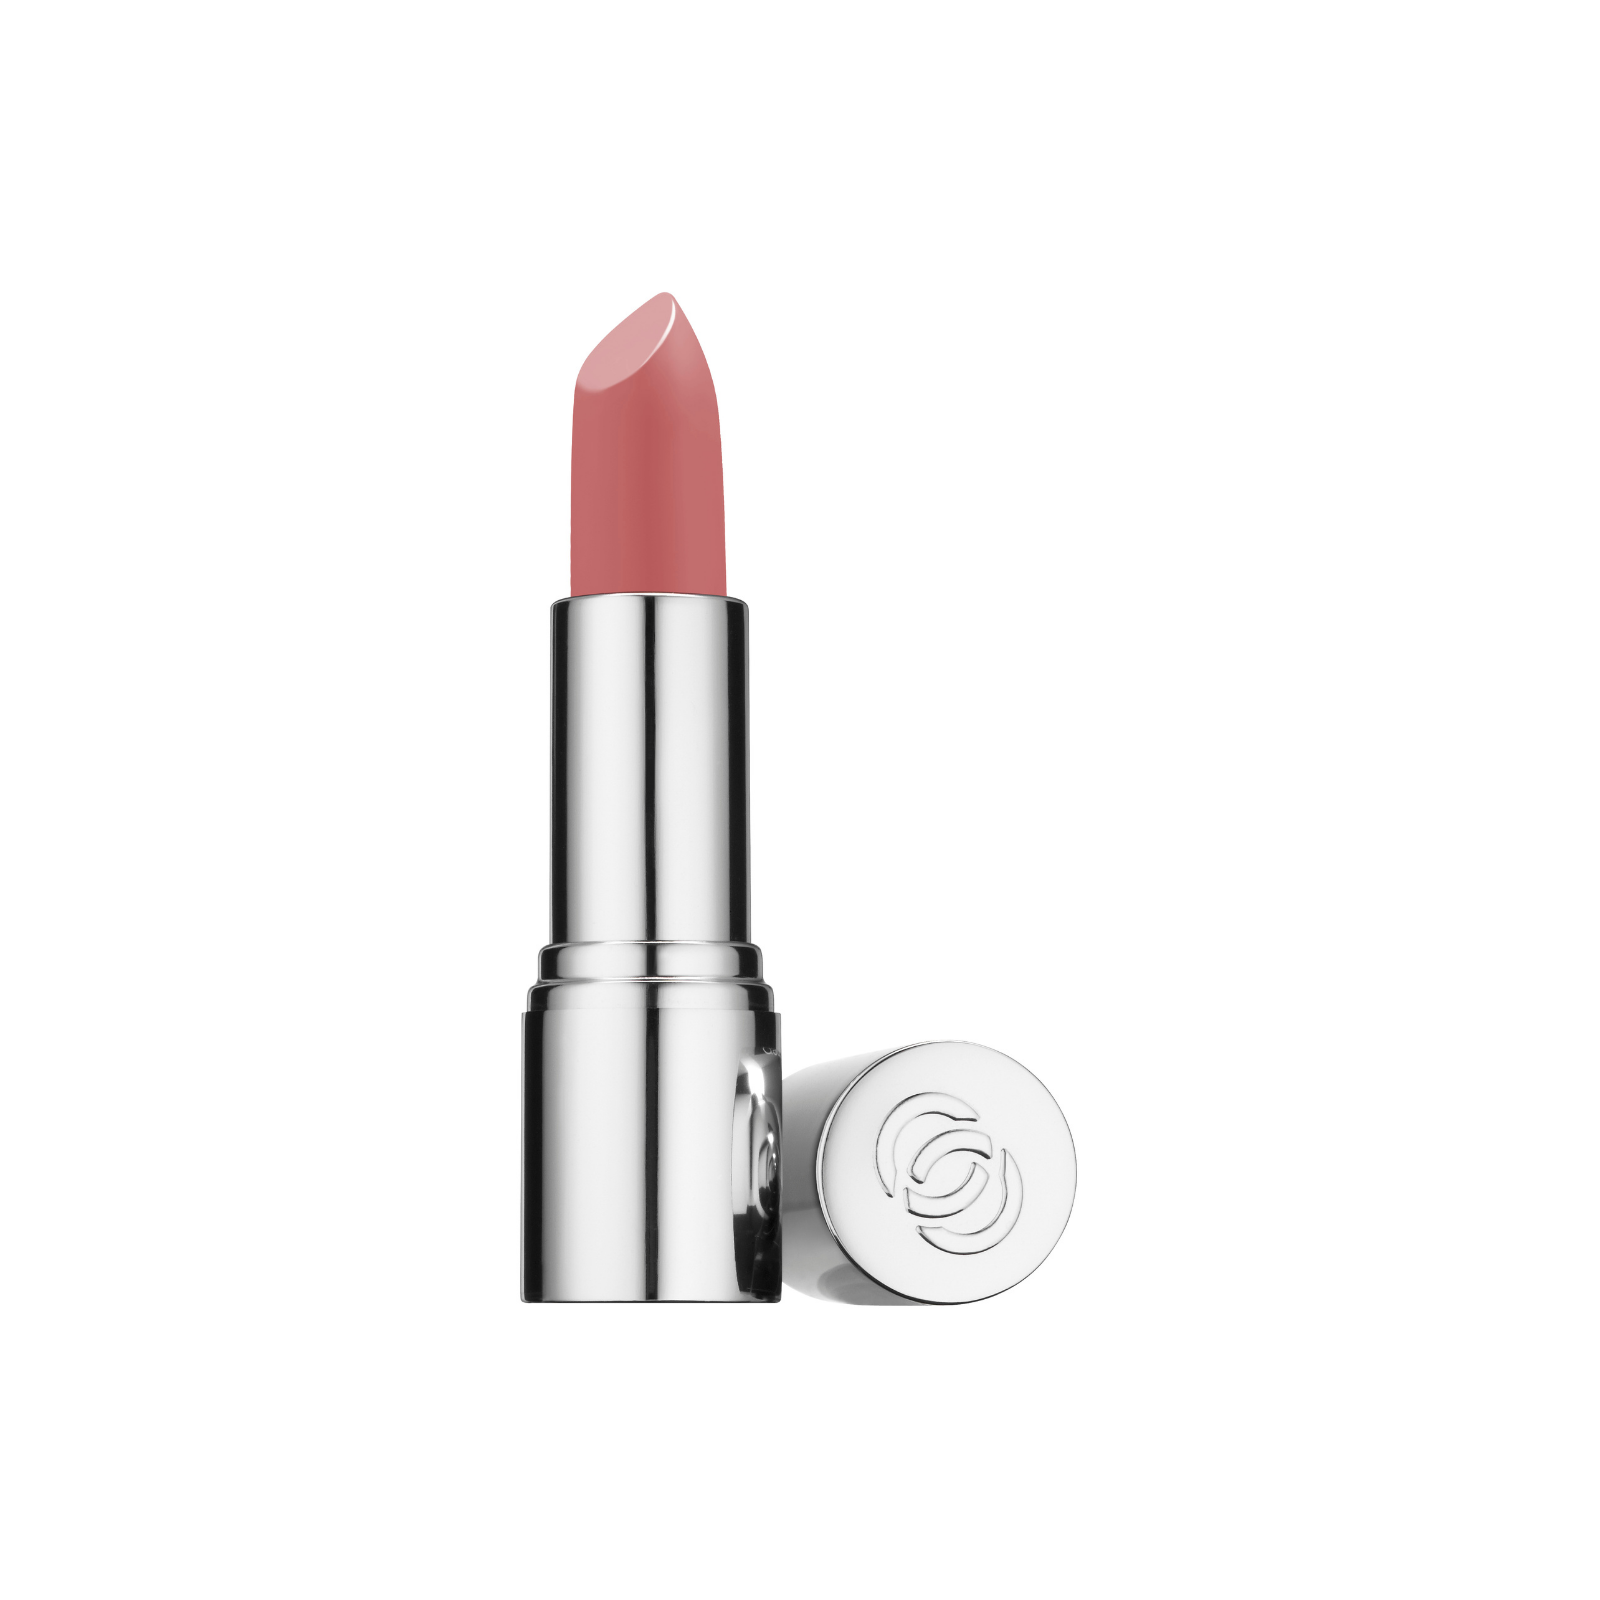 ASAP Mineral Lipcolour with Sunscreen - One 4g